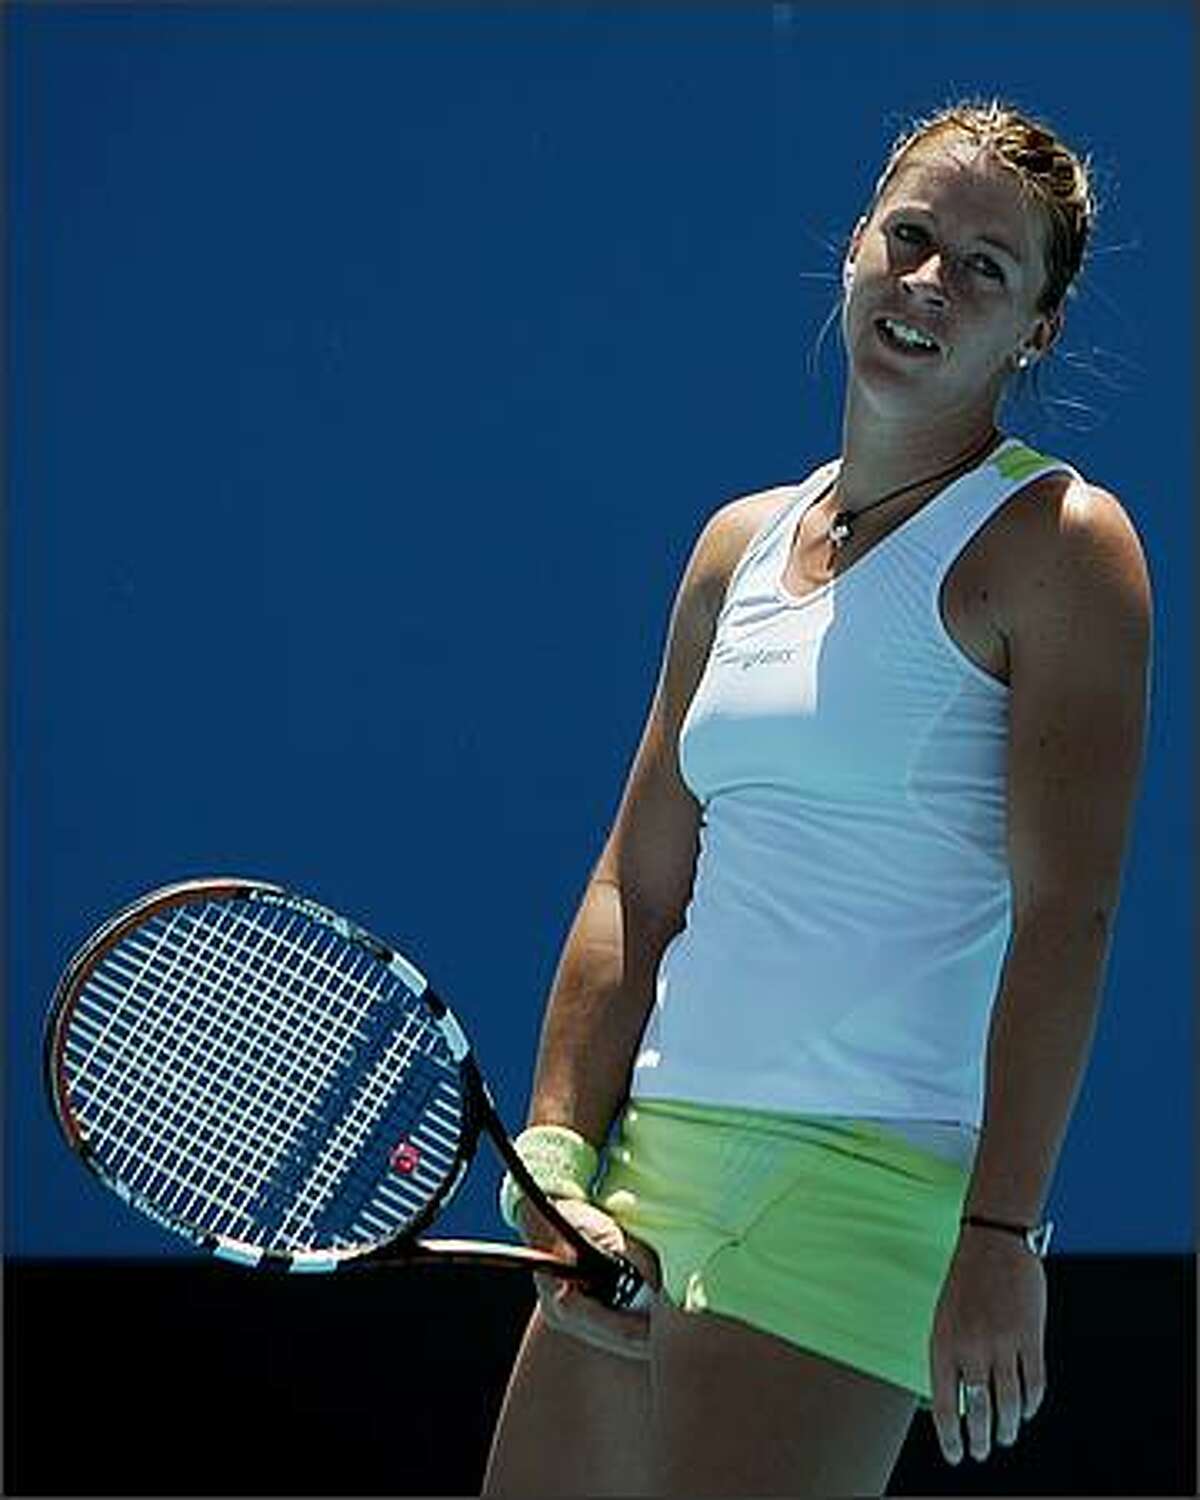 Pauline Parmentier of France reacts after a point during her second round match against Agnieszka Radwanska of Poland on day four of the Australian Open 2008 at Melbourne Park in Melbourne, Australia. (Photo by James Knowler/Getty Images)